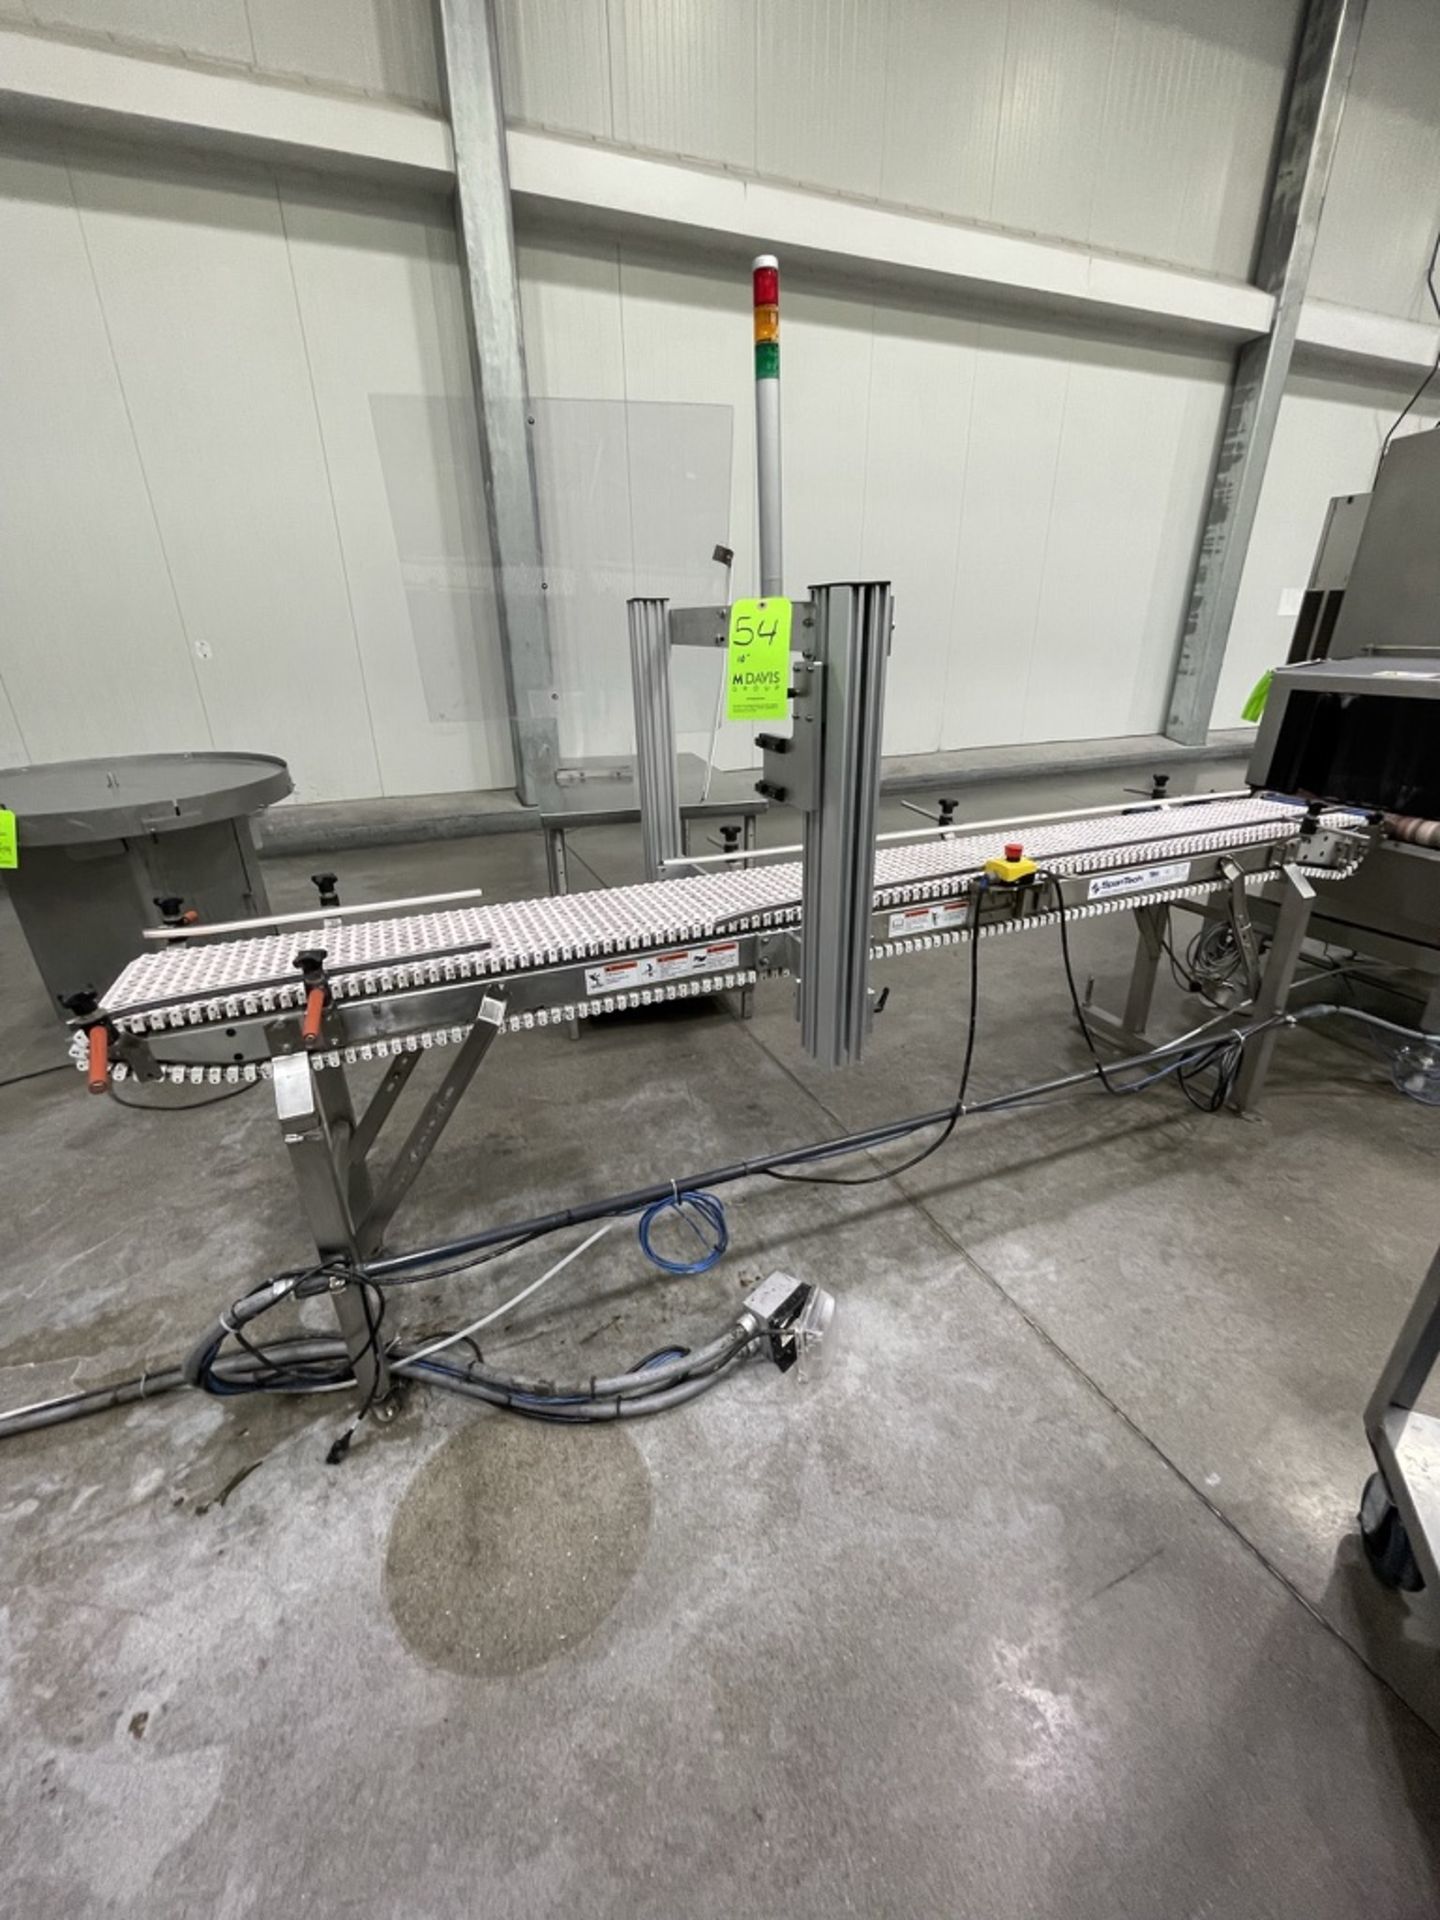 SPANTECH 10' X 12"" W CONVEYOR(INV#84339)(Located @ the MDG Auction Showroom 2.0 in Monroeville, PA)